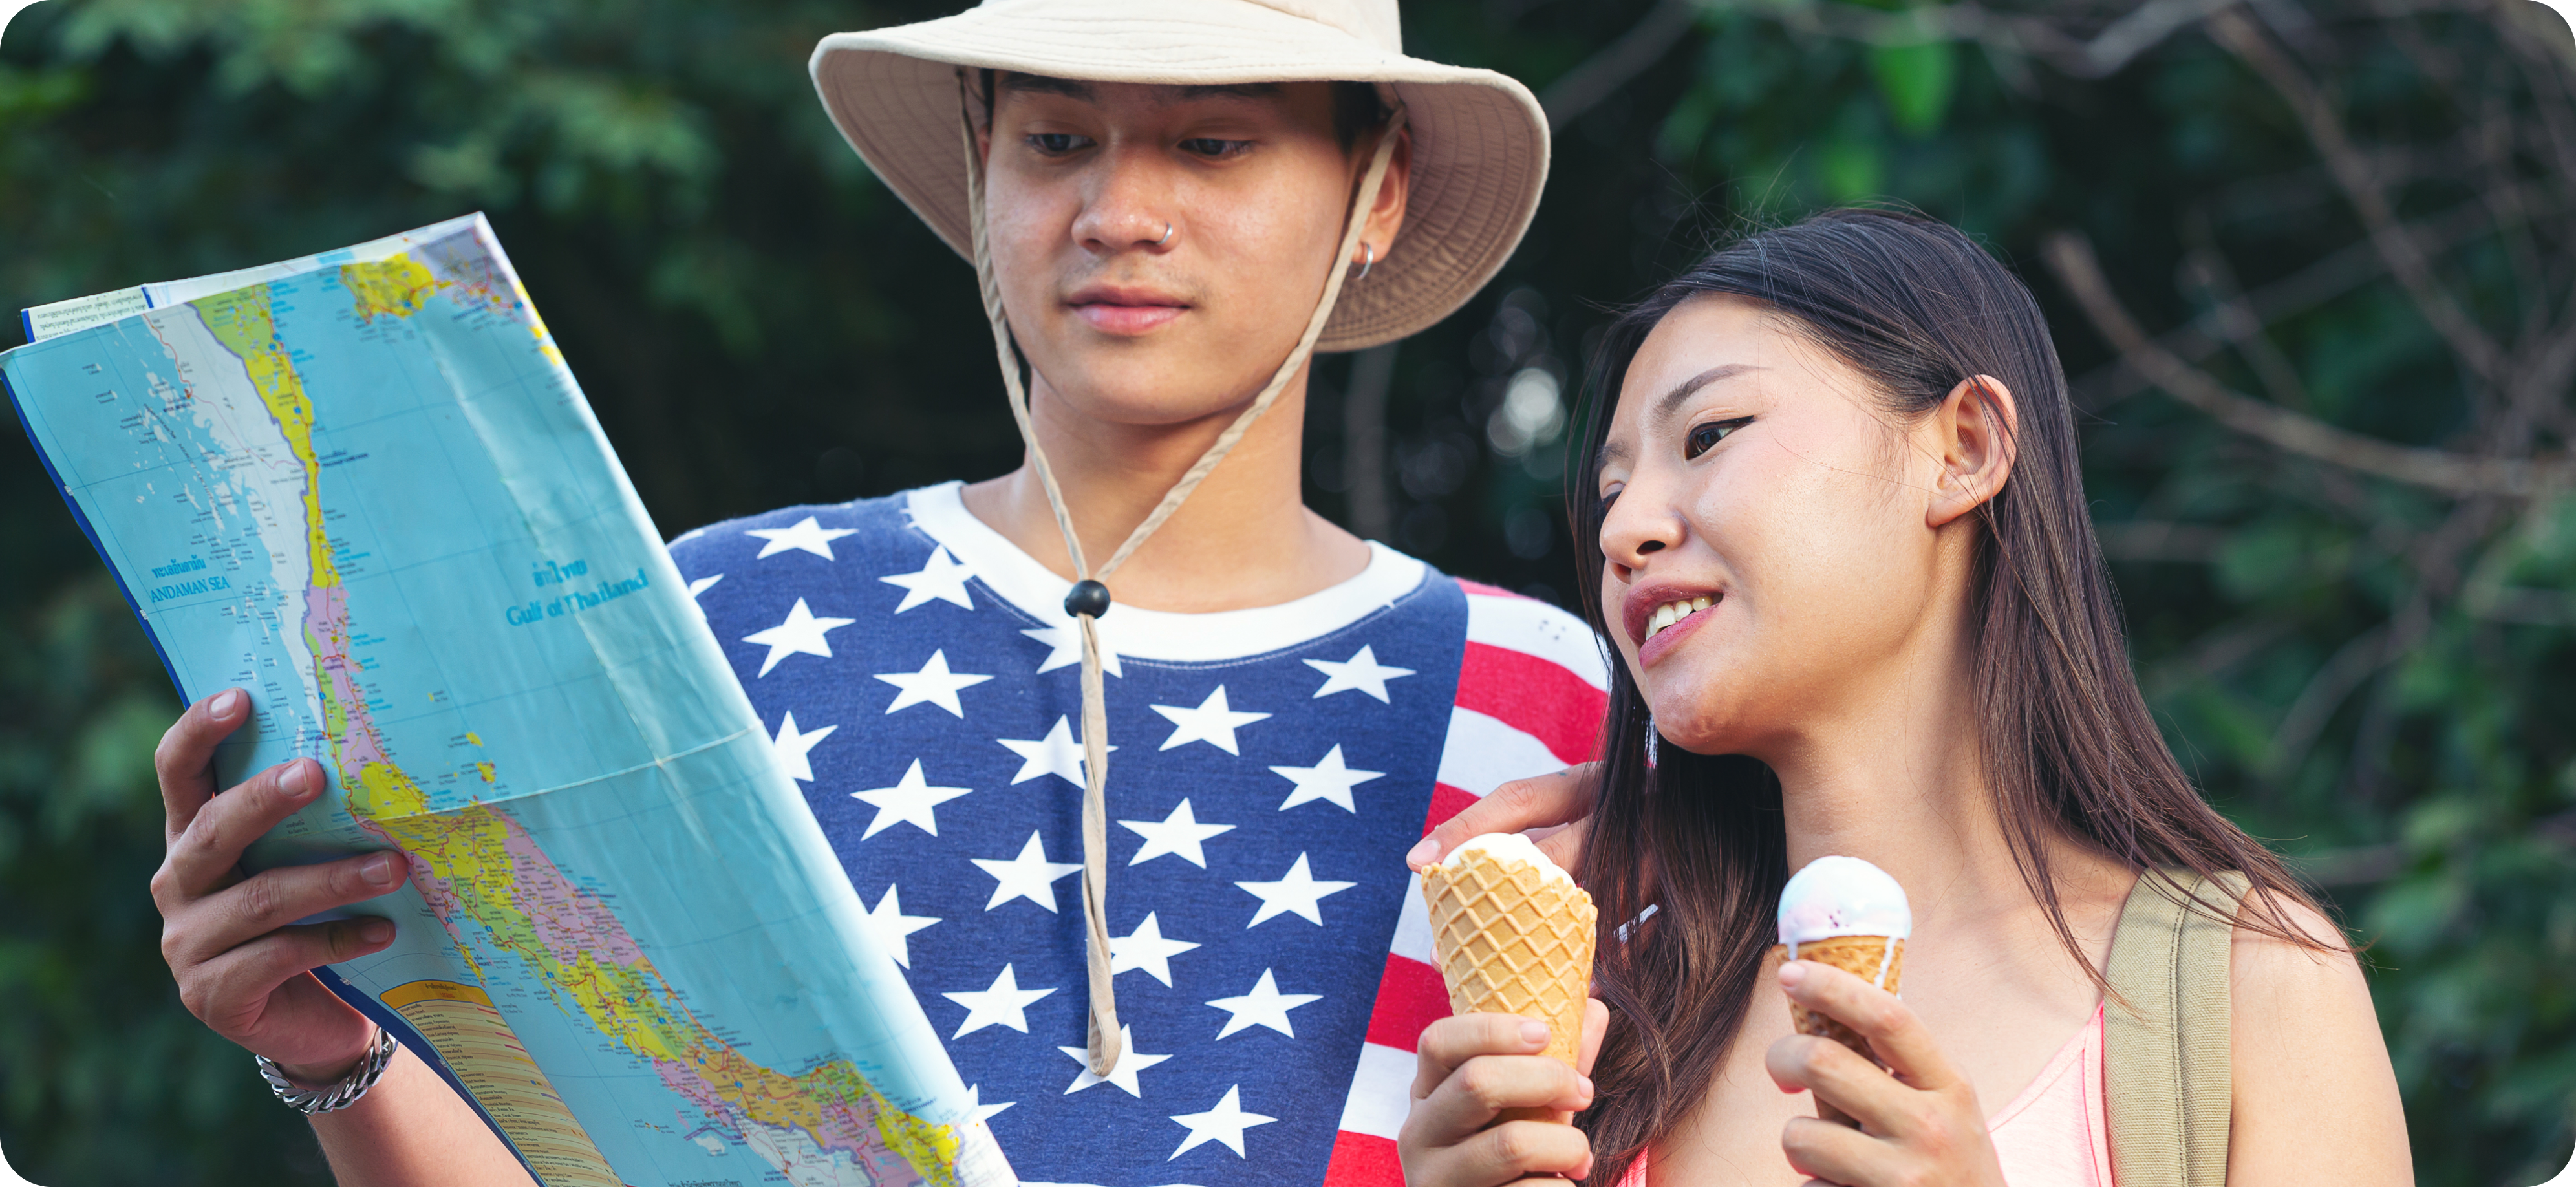 Two young tourists, holding a map in an outdoor setting